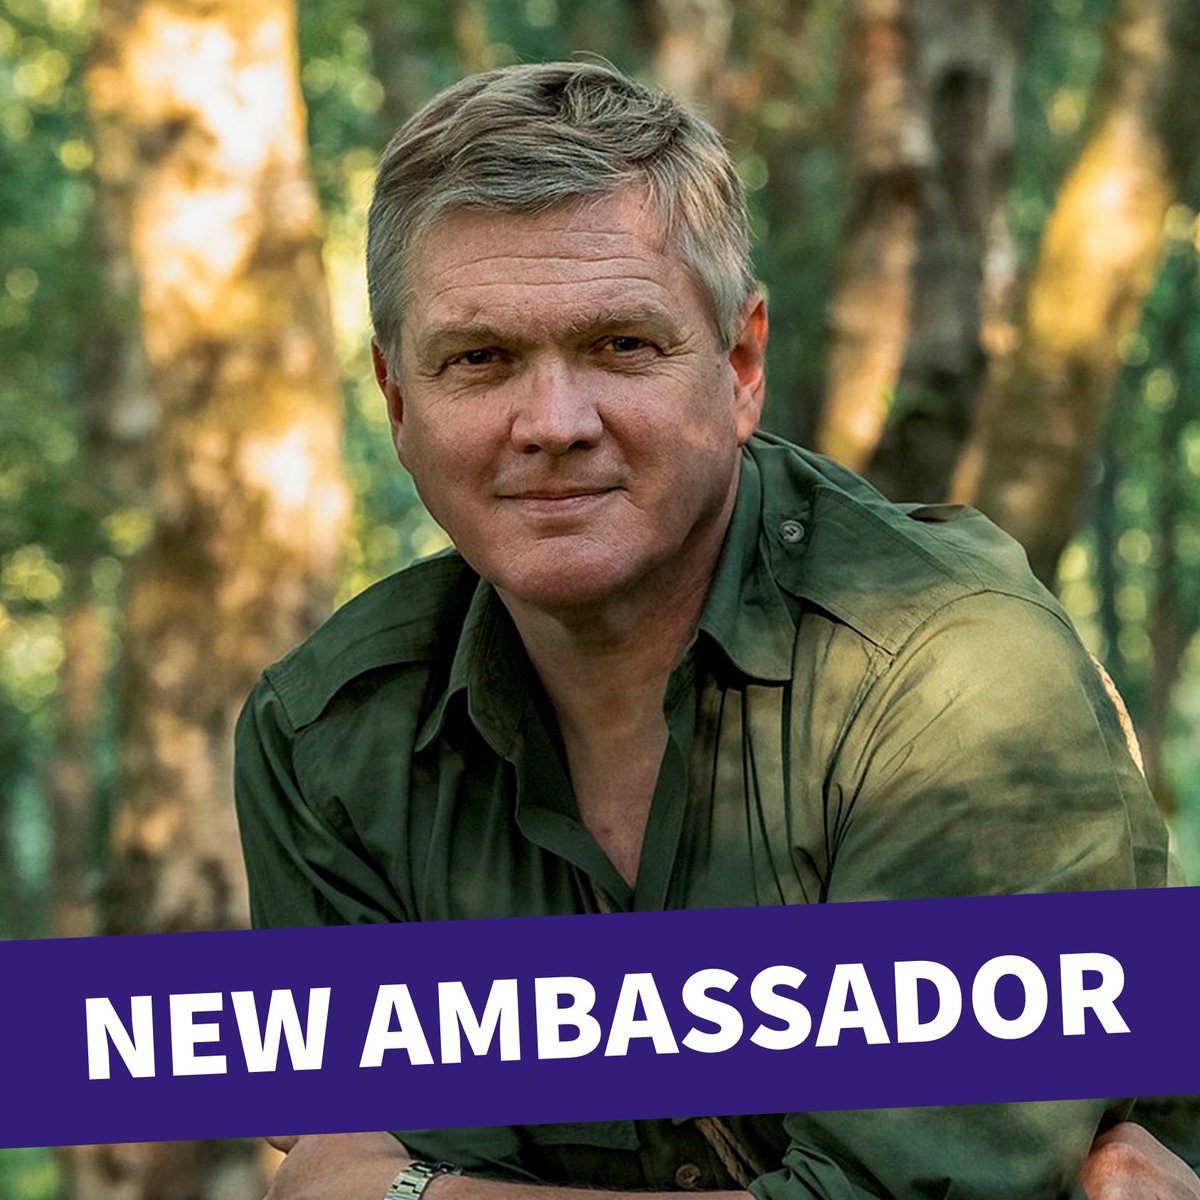 We are delighted to welcome Bushcraft and survival expert @Ray_Mears to the @UlyssesTrust as one of our Ambassadors. We are thrilled to have Ray on board. #thankyou Ray! ulyssestrust.co.uk/about-us/ambas… #ThankyouThursday